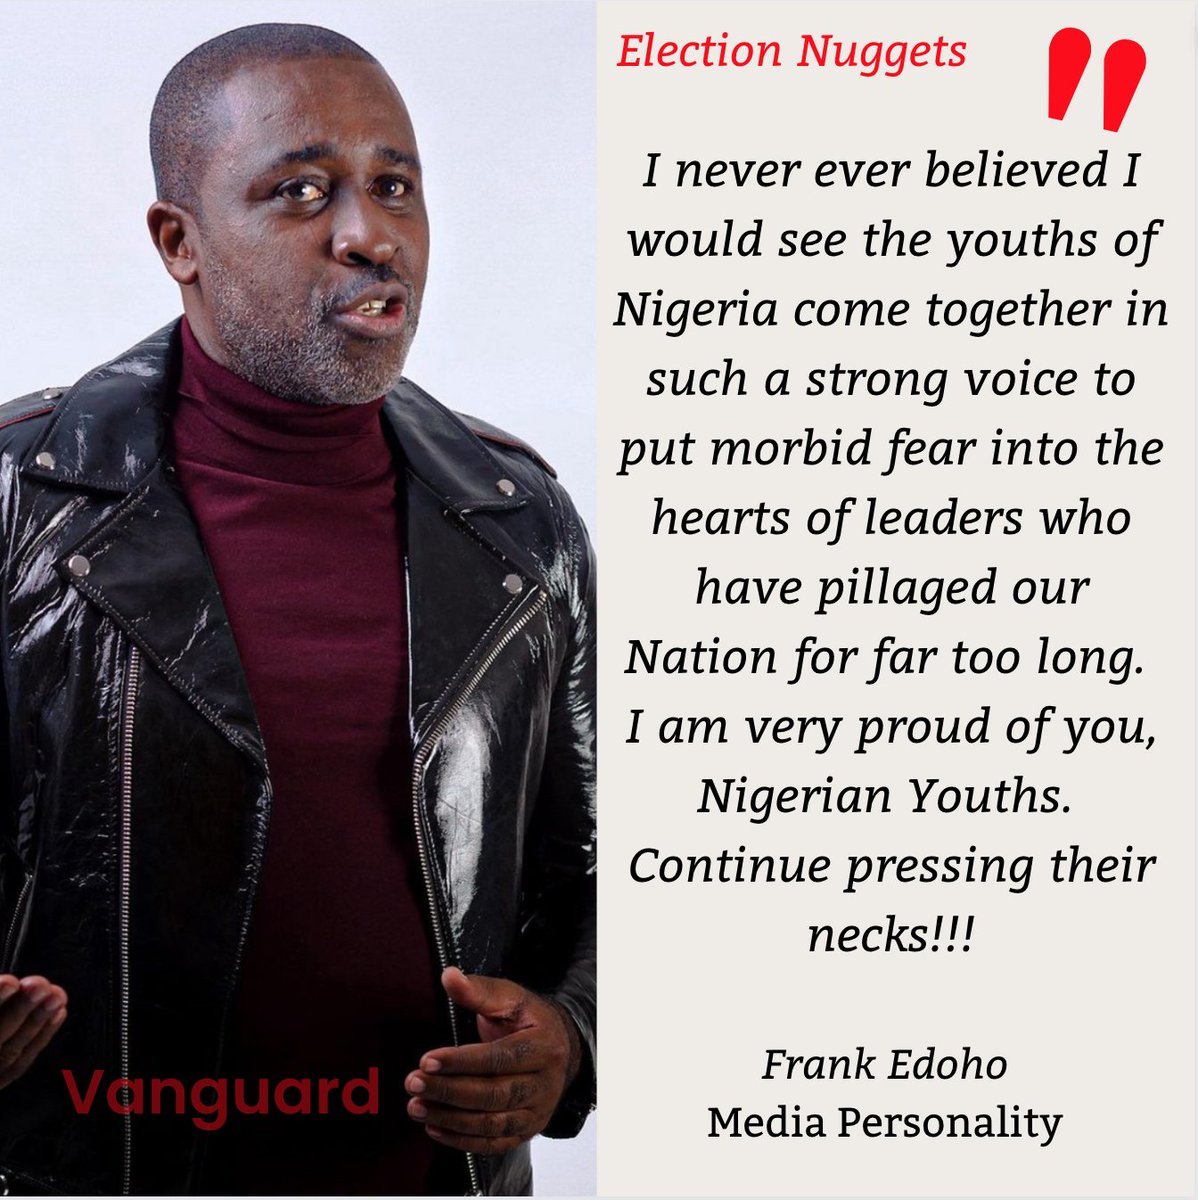 #frankedoho #mediapersonality #contents #electionnuggets #2023election #nigeriadecides #vanguardnewspapers